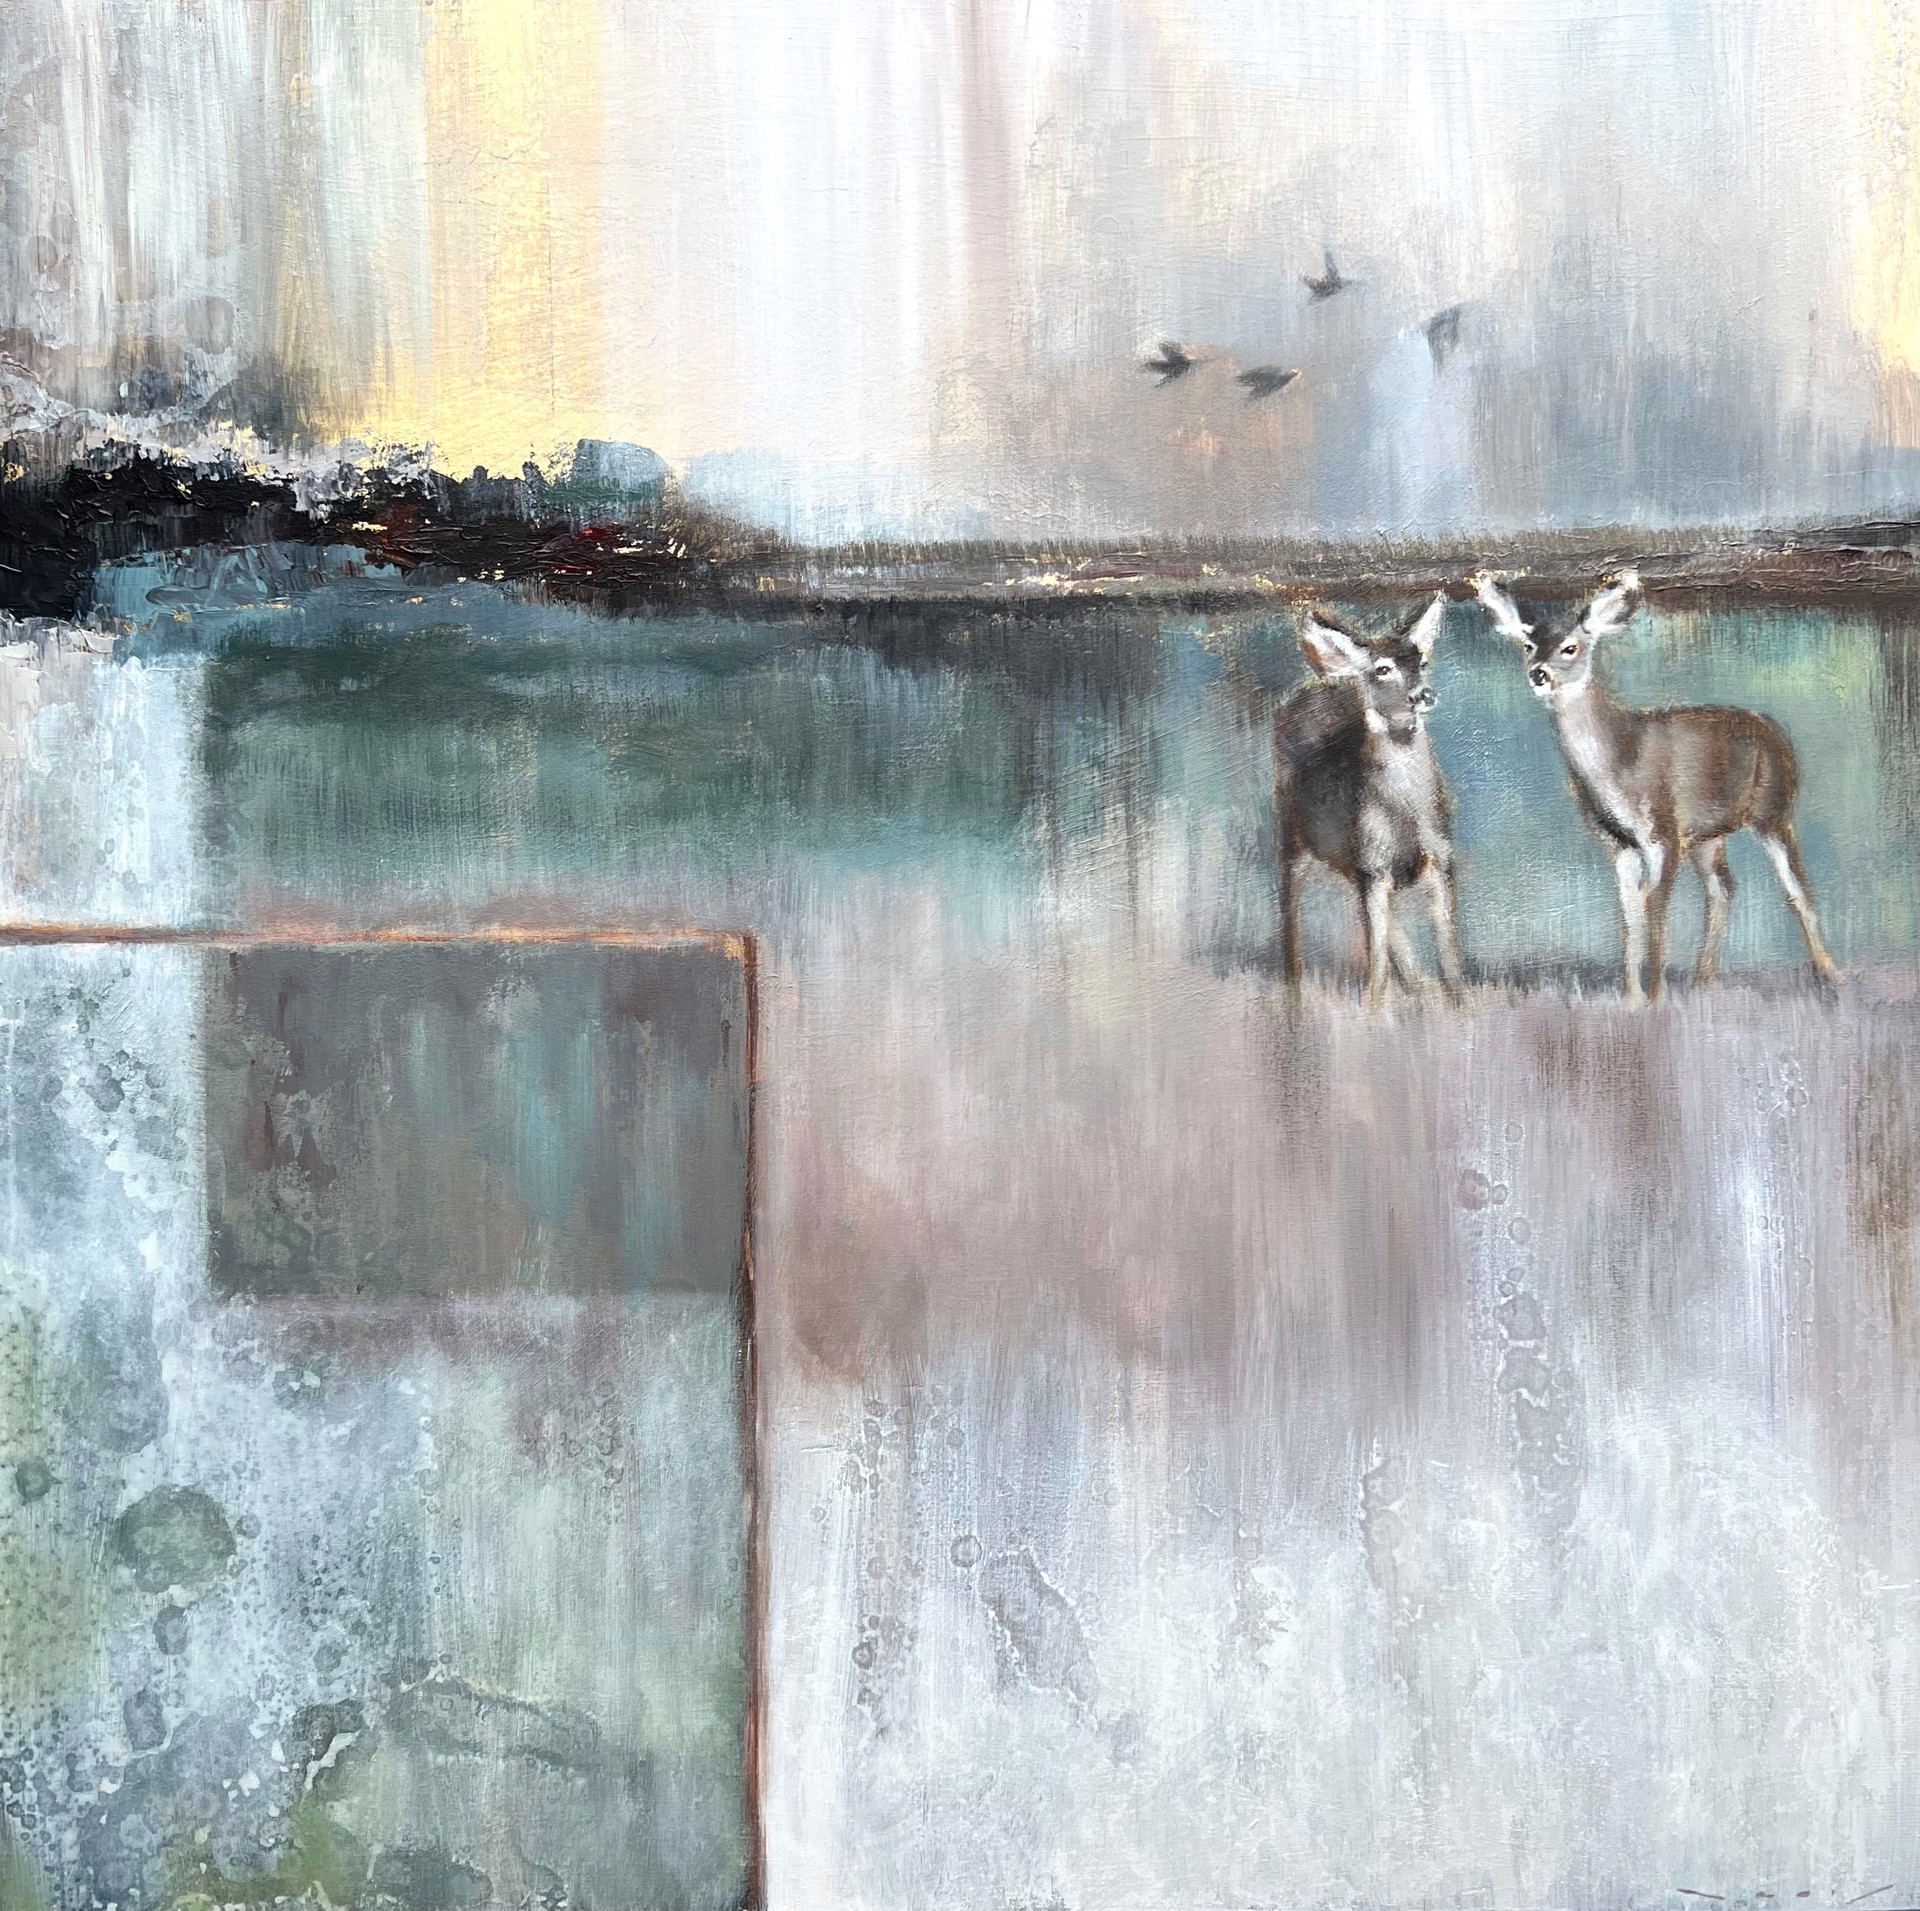 Original Mixed Media Painting By Nealy Riley Featuring Two Deer Over An Abstract Background